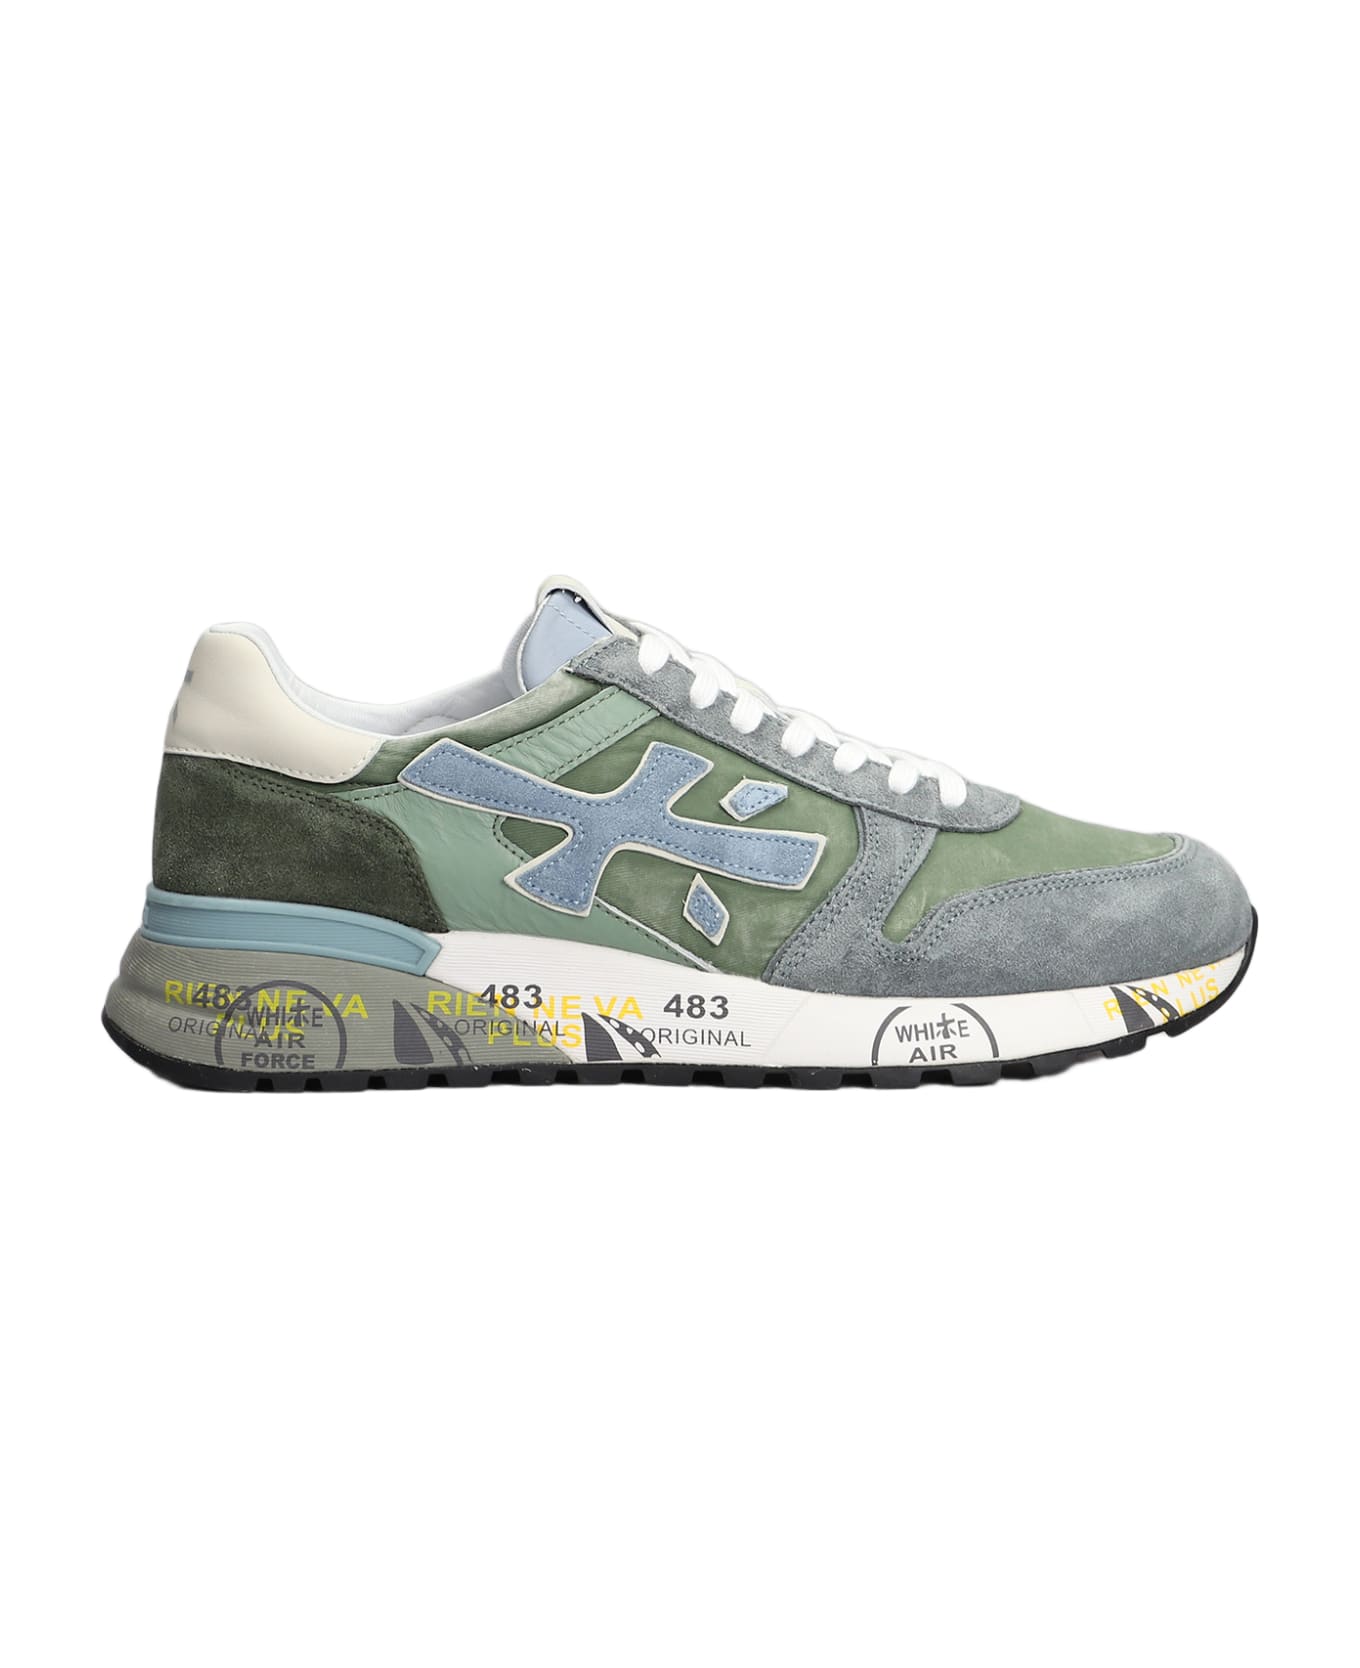 Premiata Mick Sneakers In Green Suede And Fabric - green